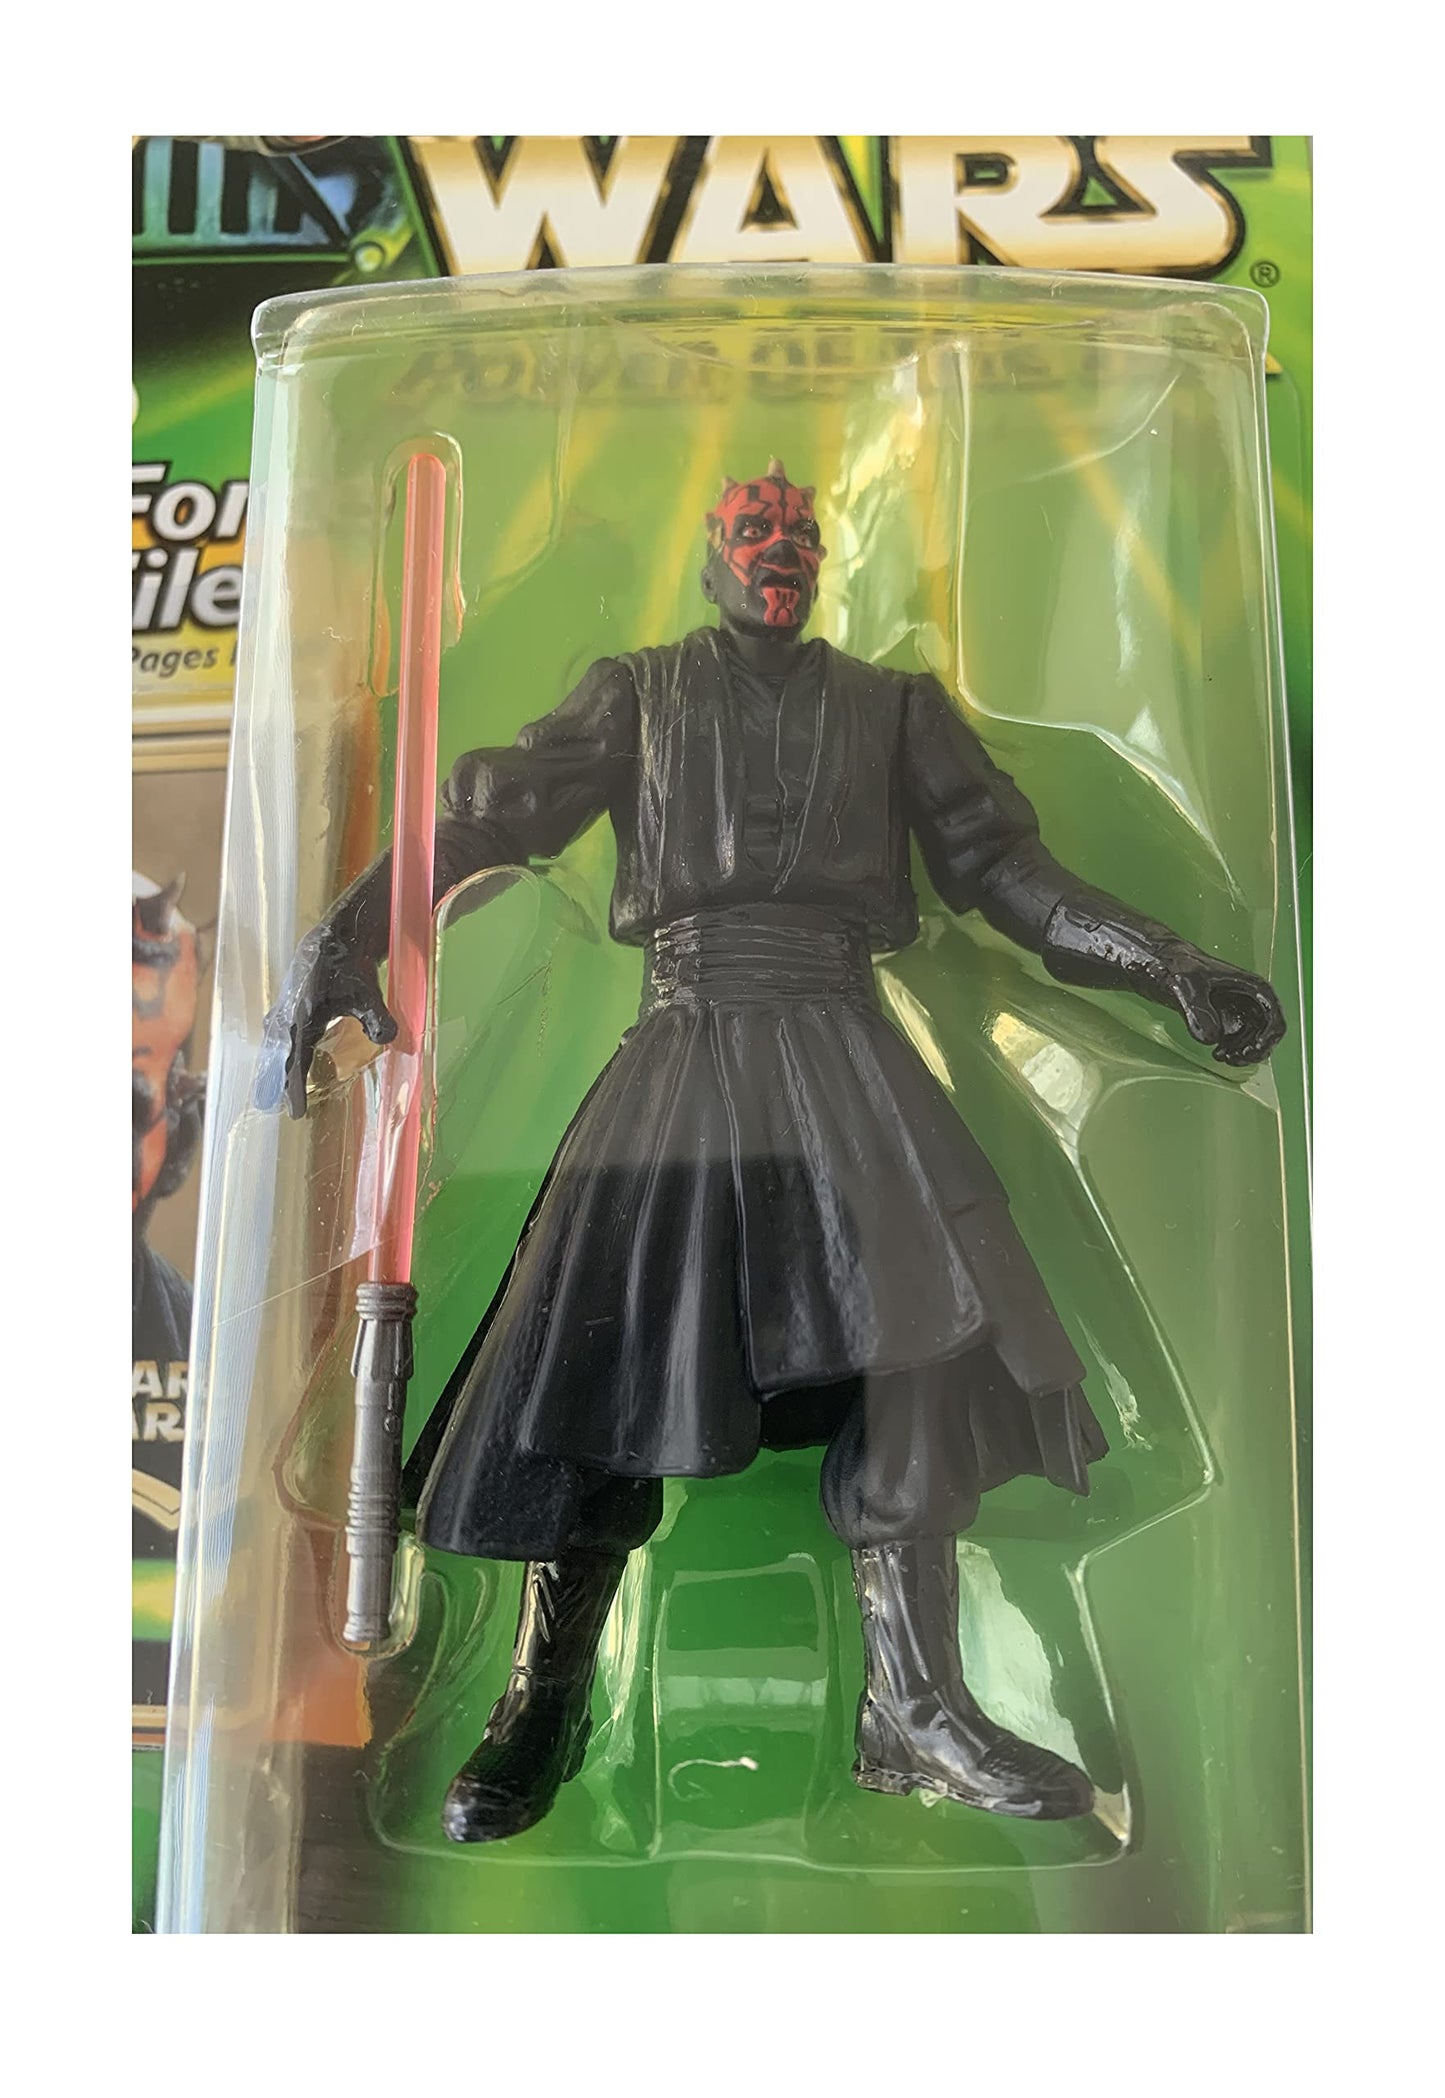 Vintage 2000 Star Wars Power Of The Jedi Collection 1 Darth Maul Final Duel Action Figure - Brand New Shop Stock Room Find